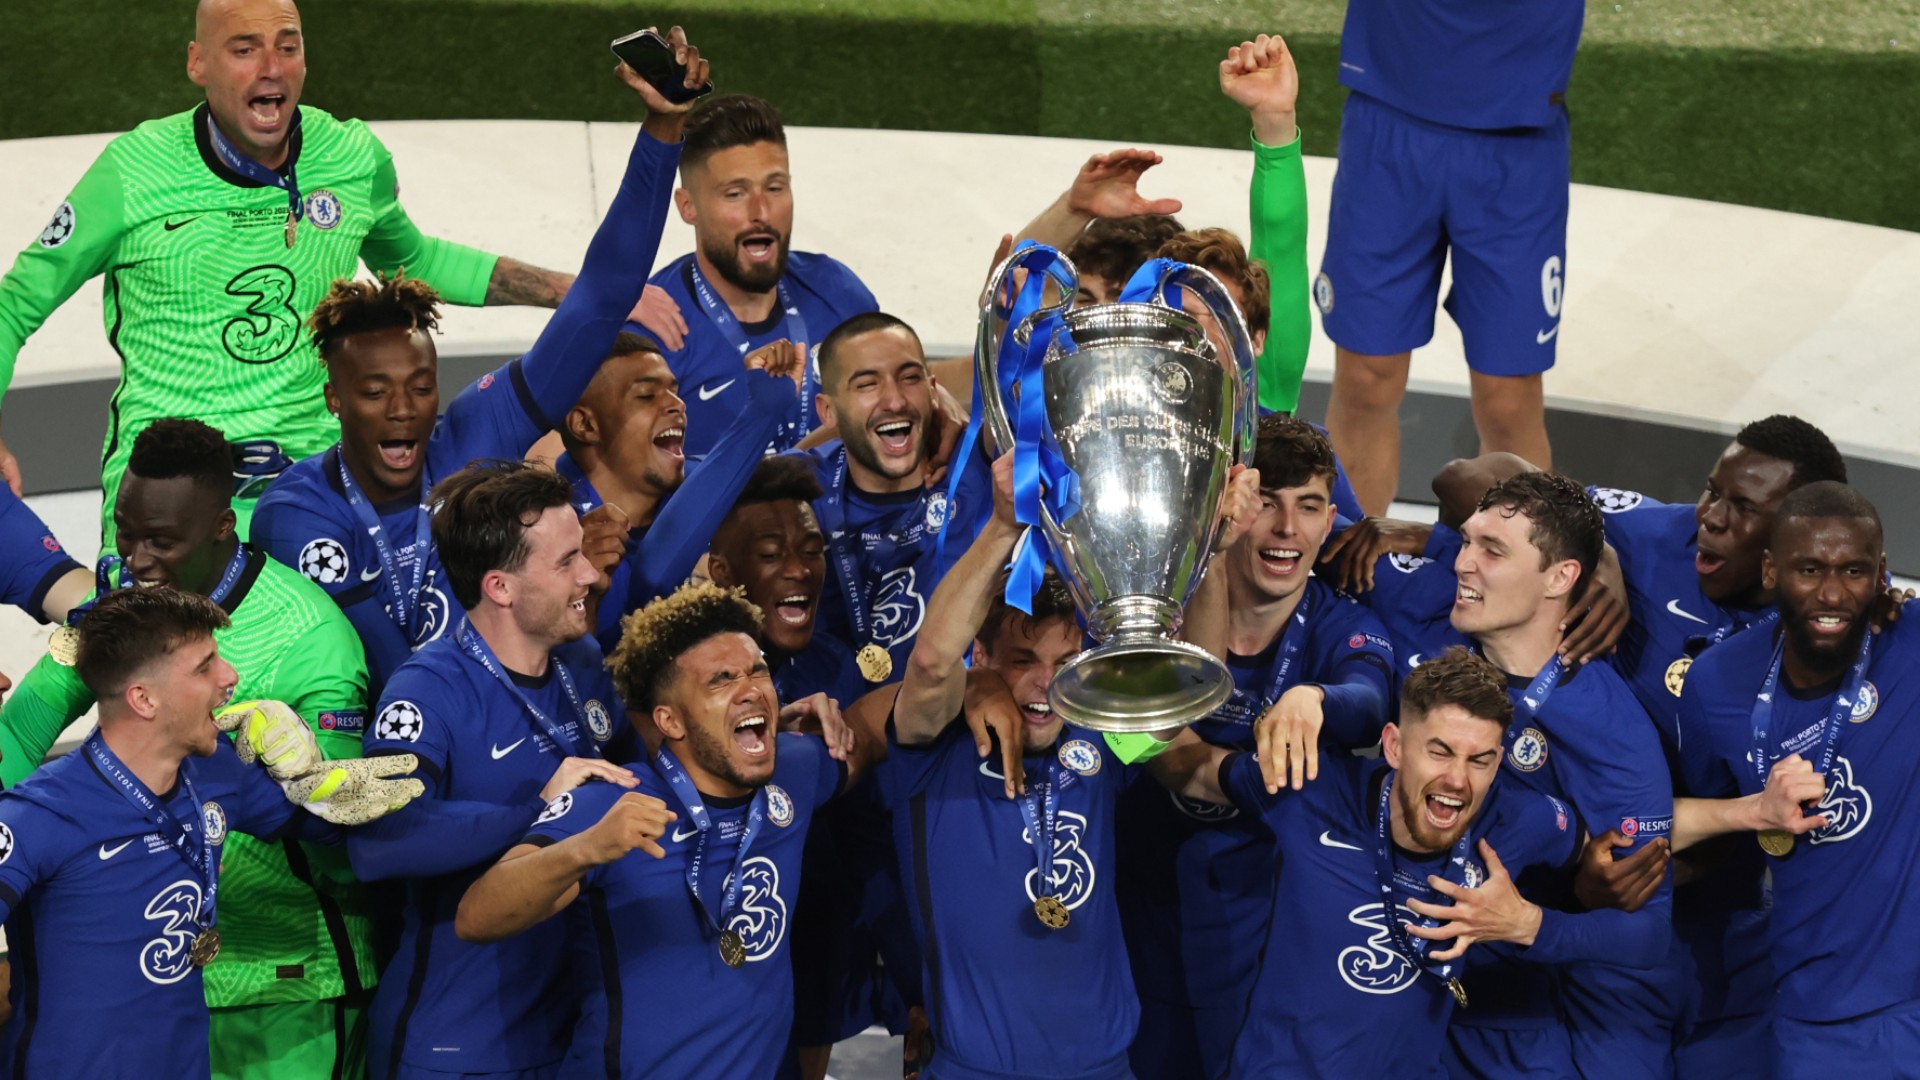 Chelsea vs. Manchester City score, result, highlights from 2021 Champions League final